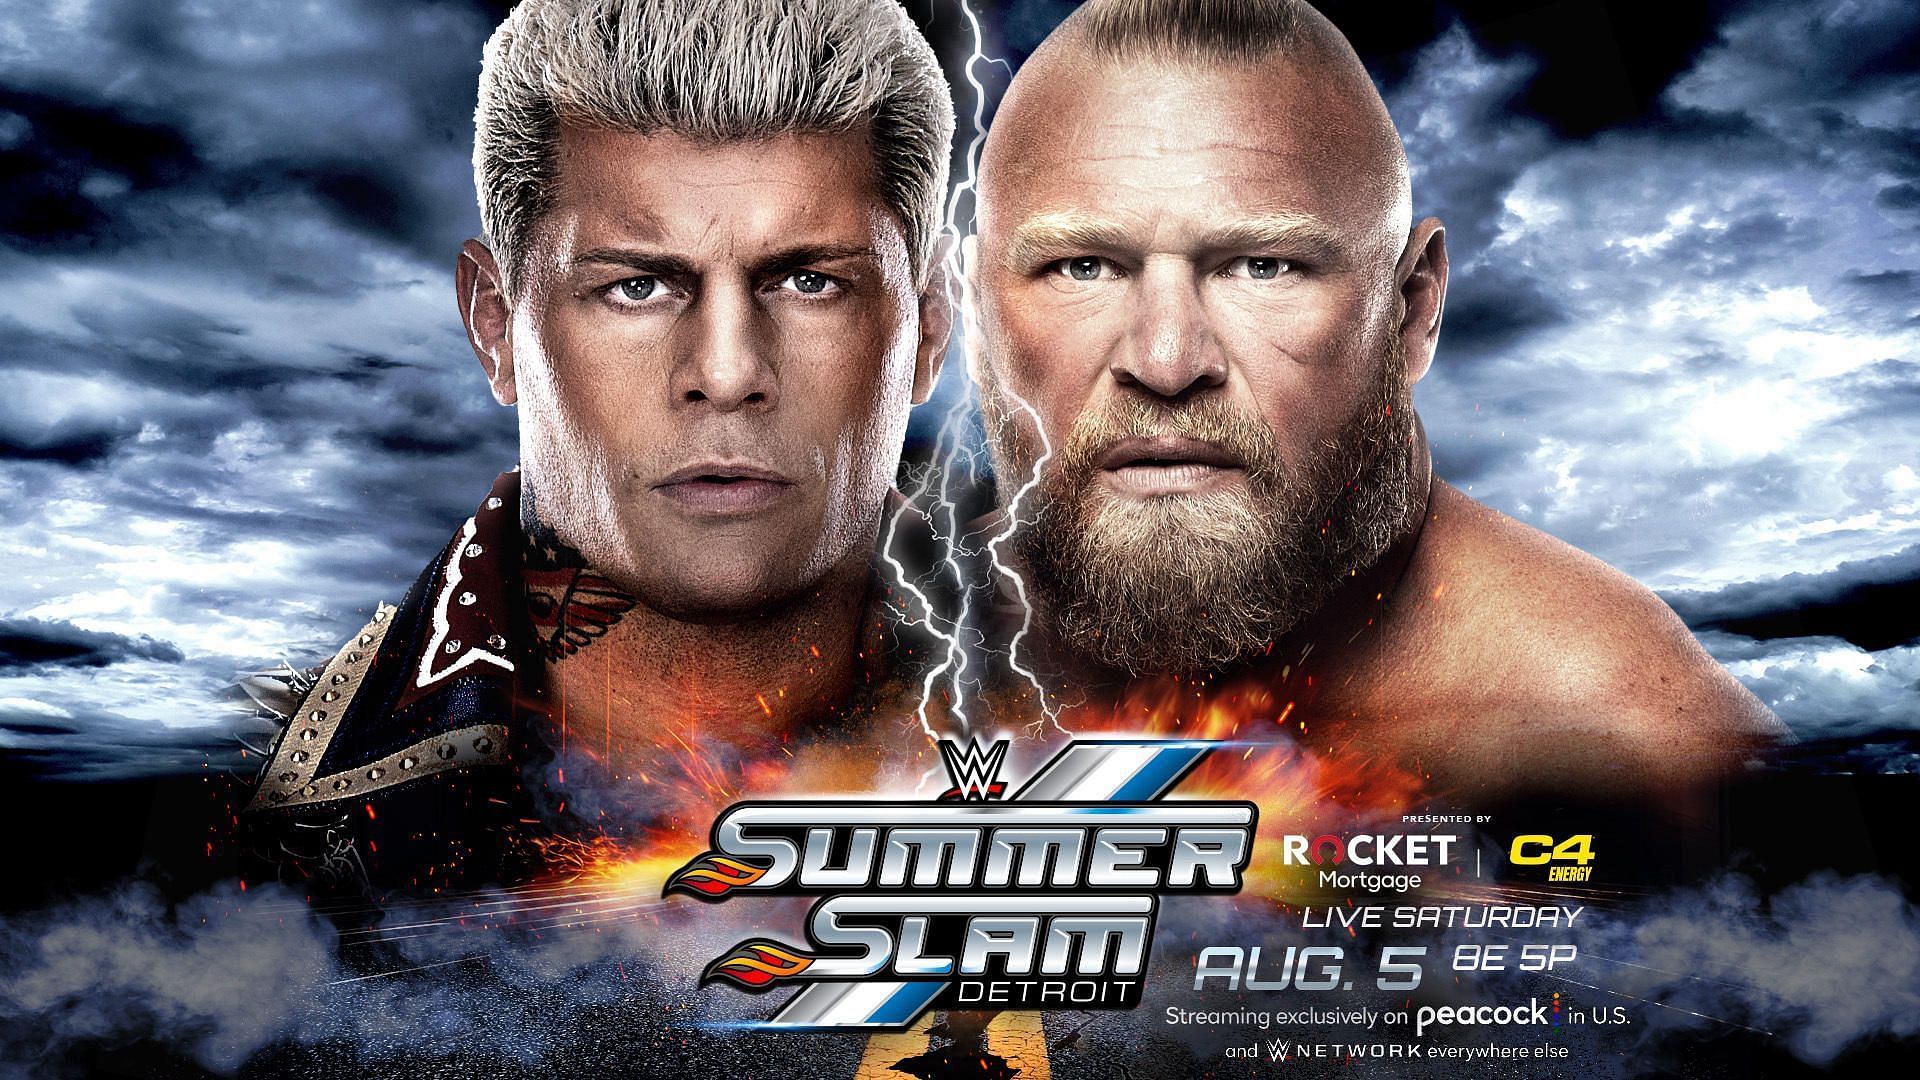 How will Cody Rhodes vs. Brock Lesnar III end?